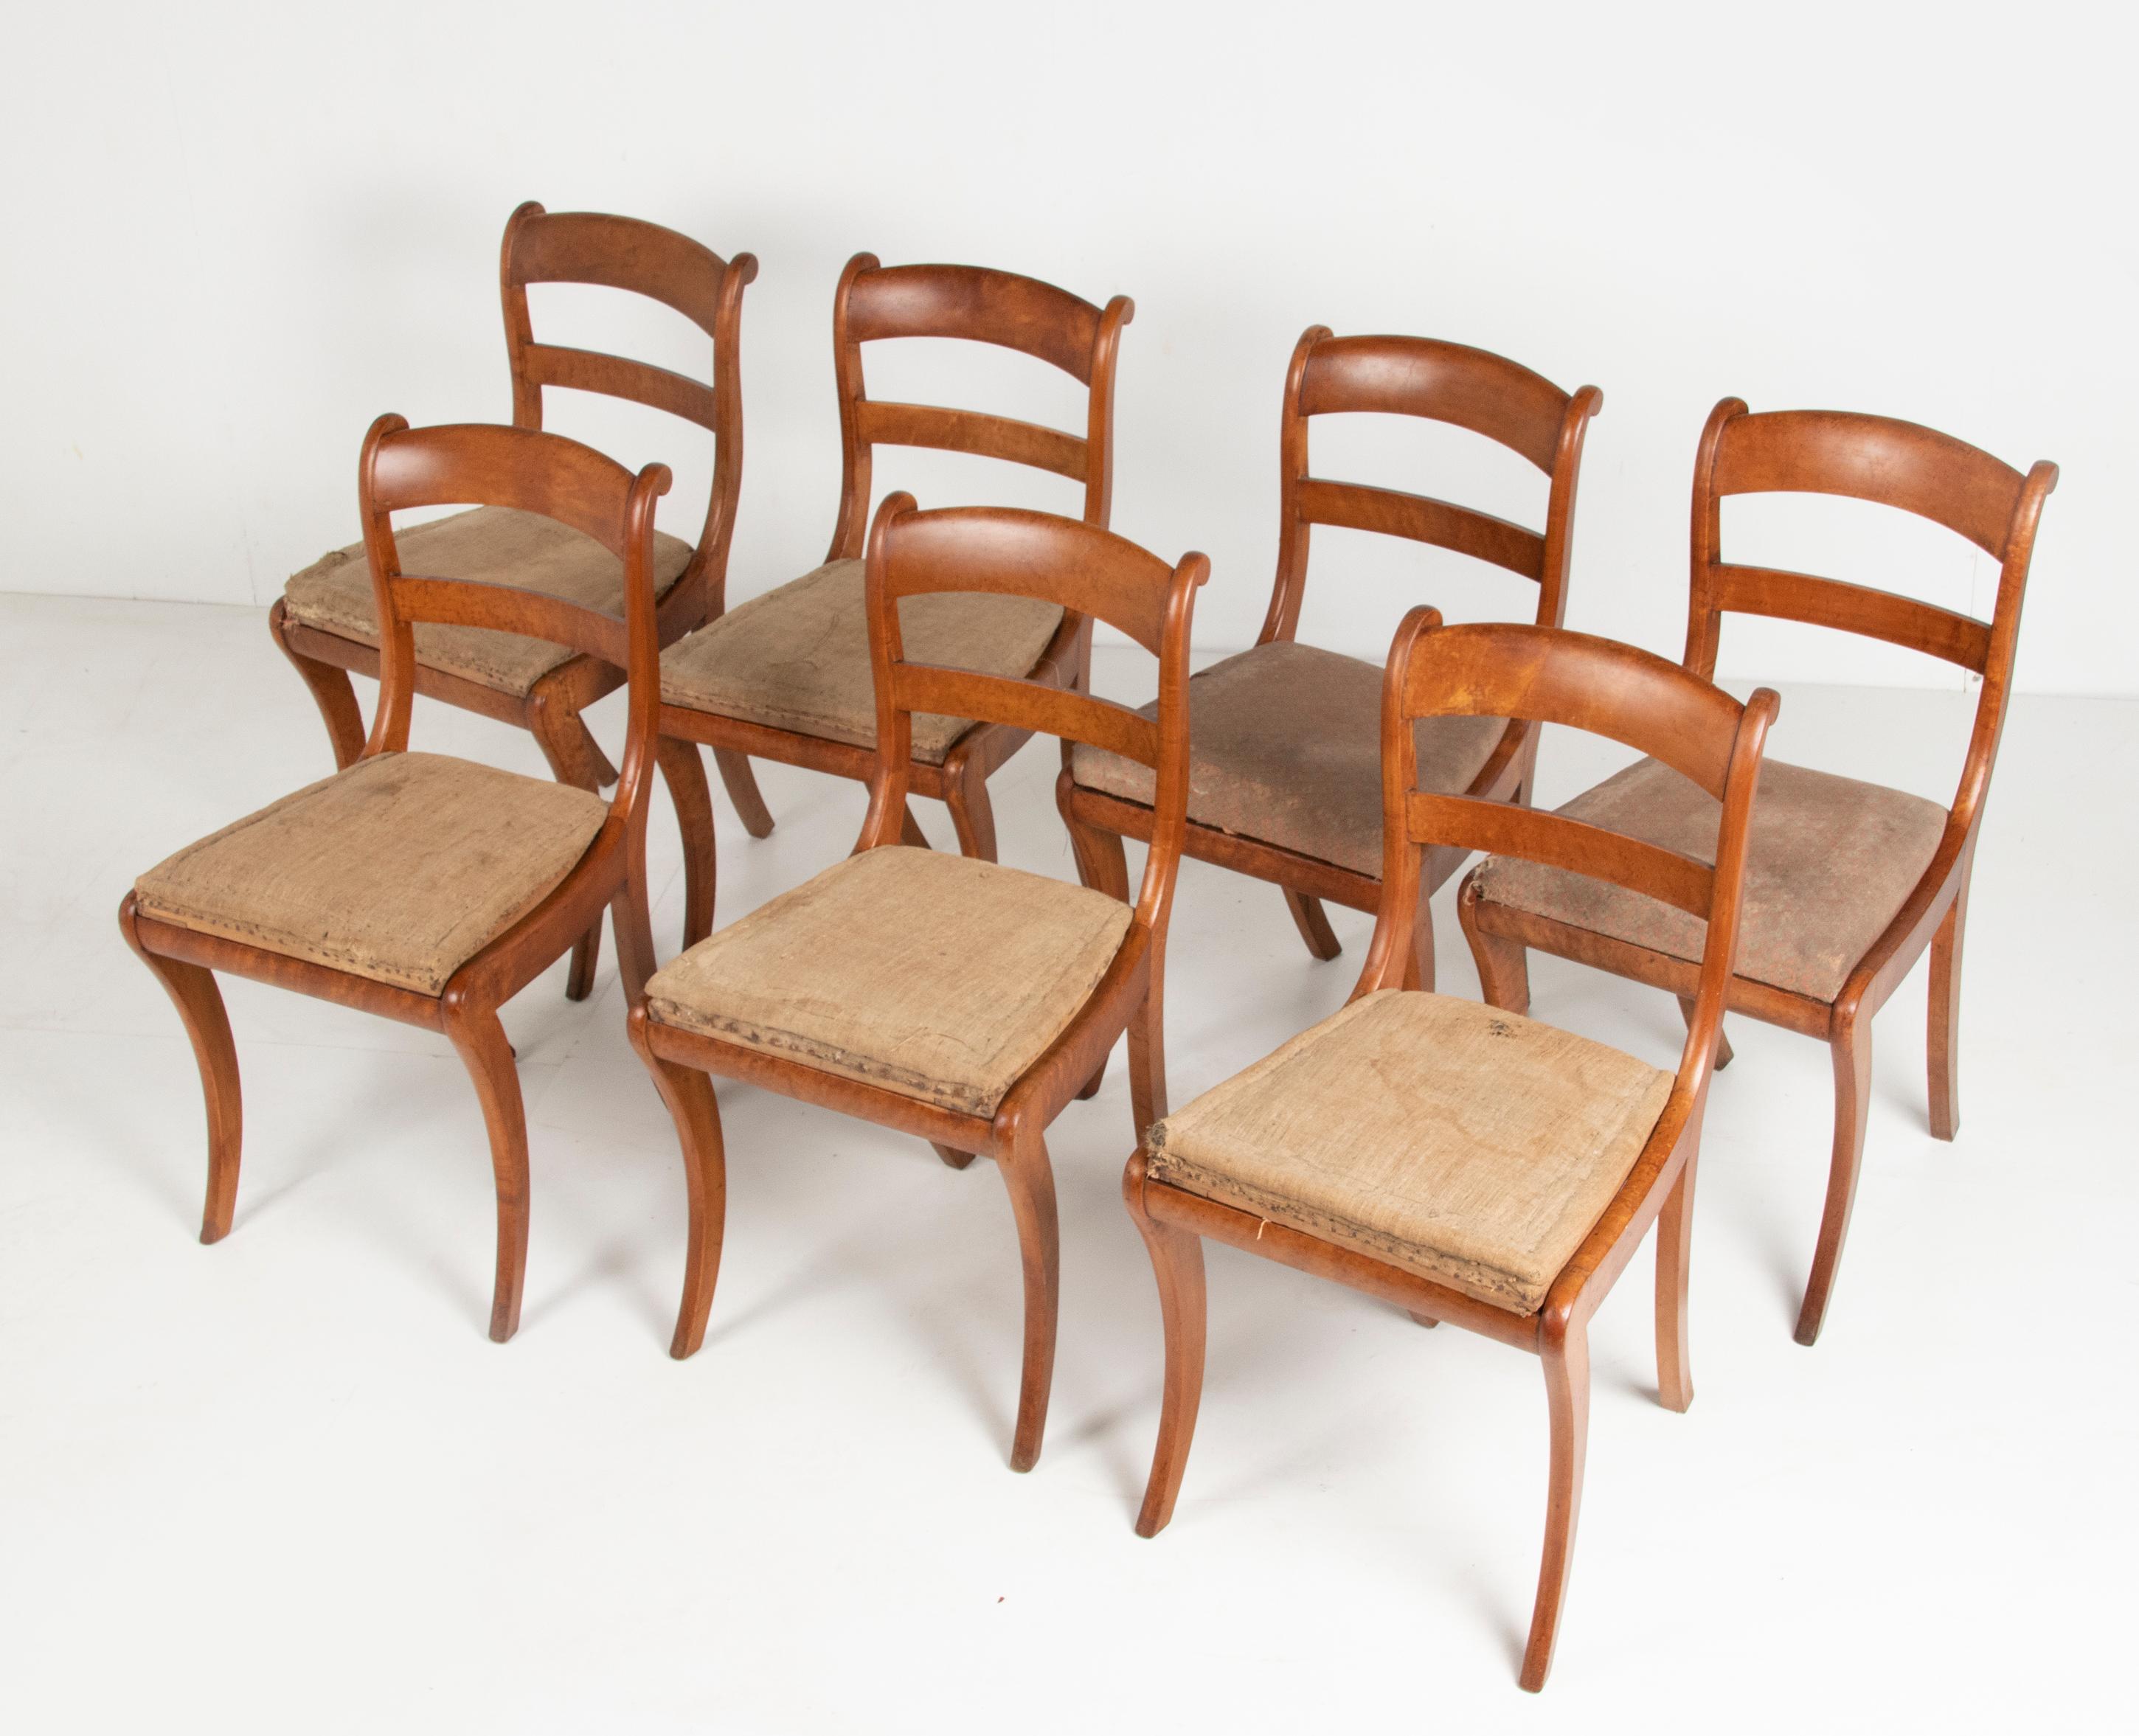 Birdseye Maple Early 19th Century Charles X Birds-Eye Maple Wood Dining Chairs For Sale